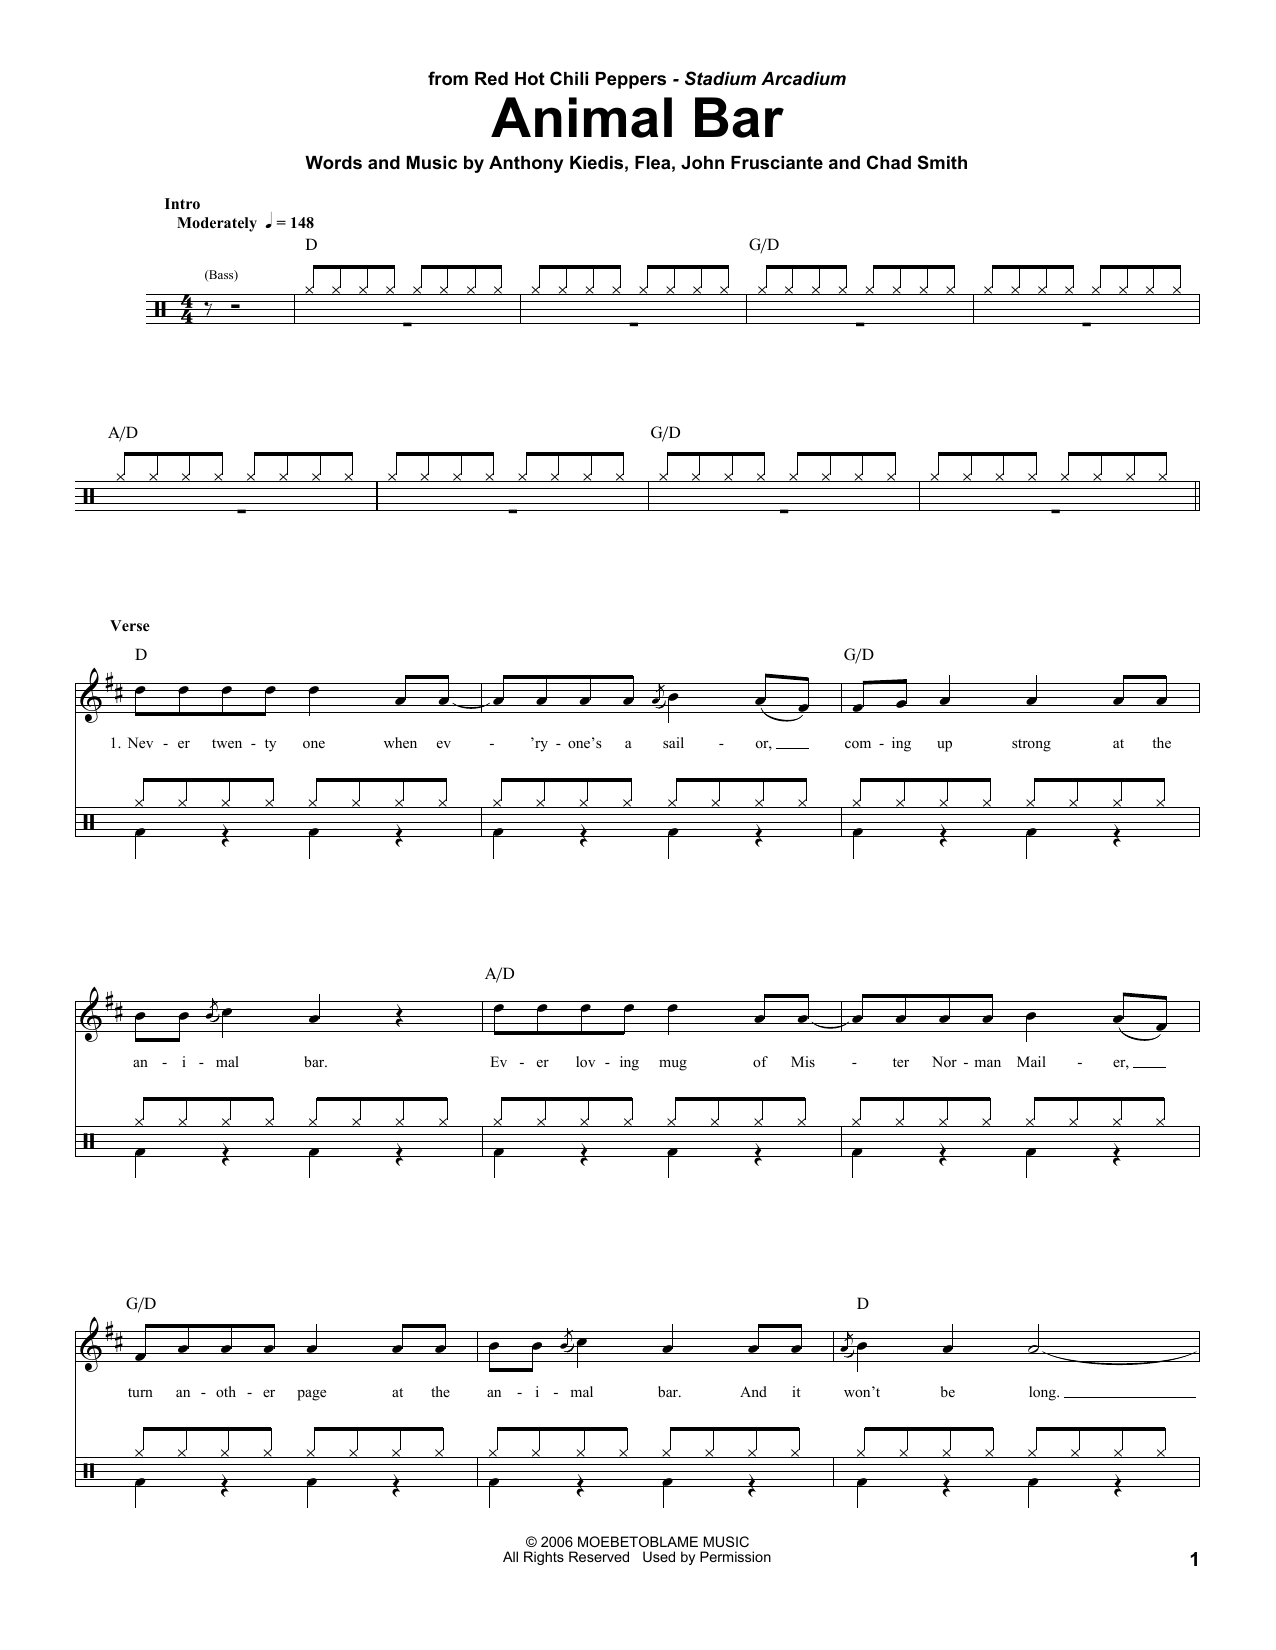 Download Red Hot Chili Peppers Animal Bar Sheet Music